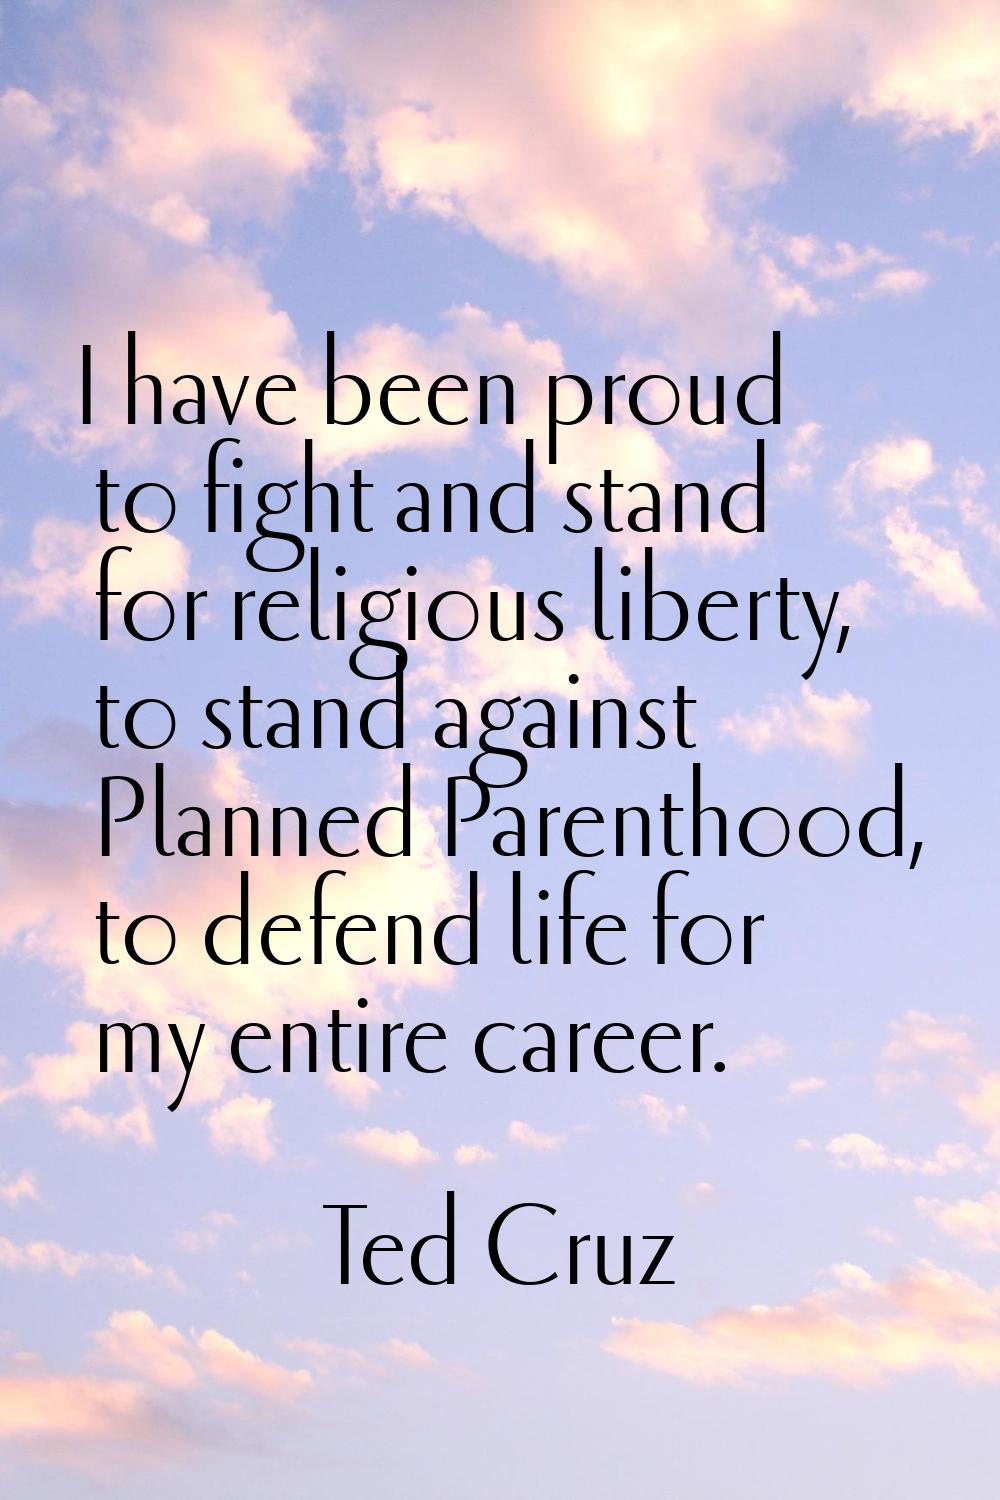 I have been proud to fight and stand for religious liberty, to stand against Planned Parenthood, to